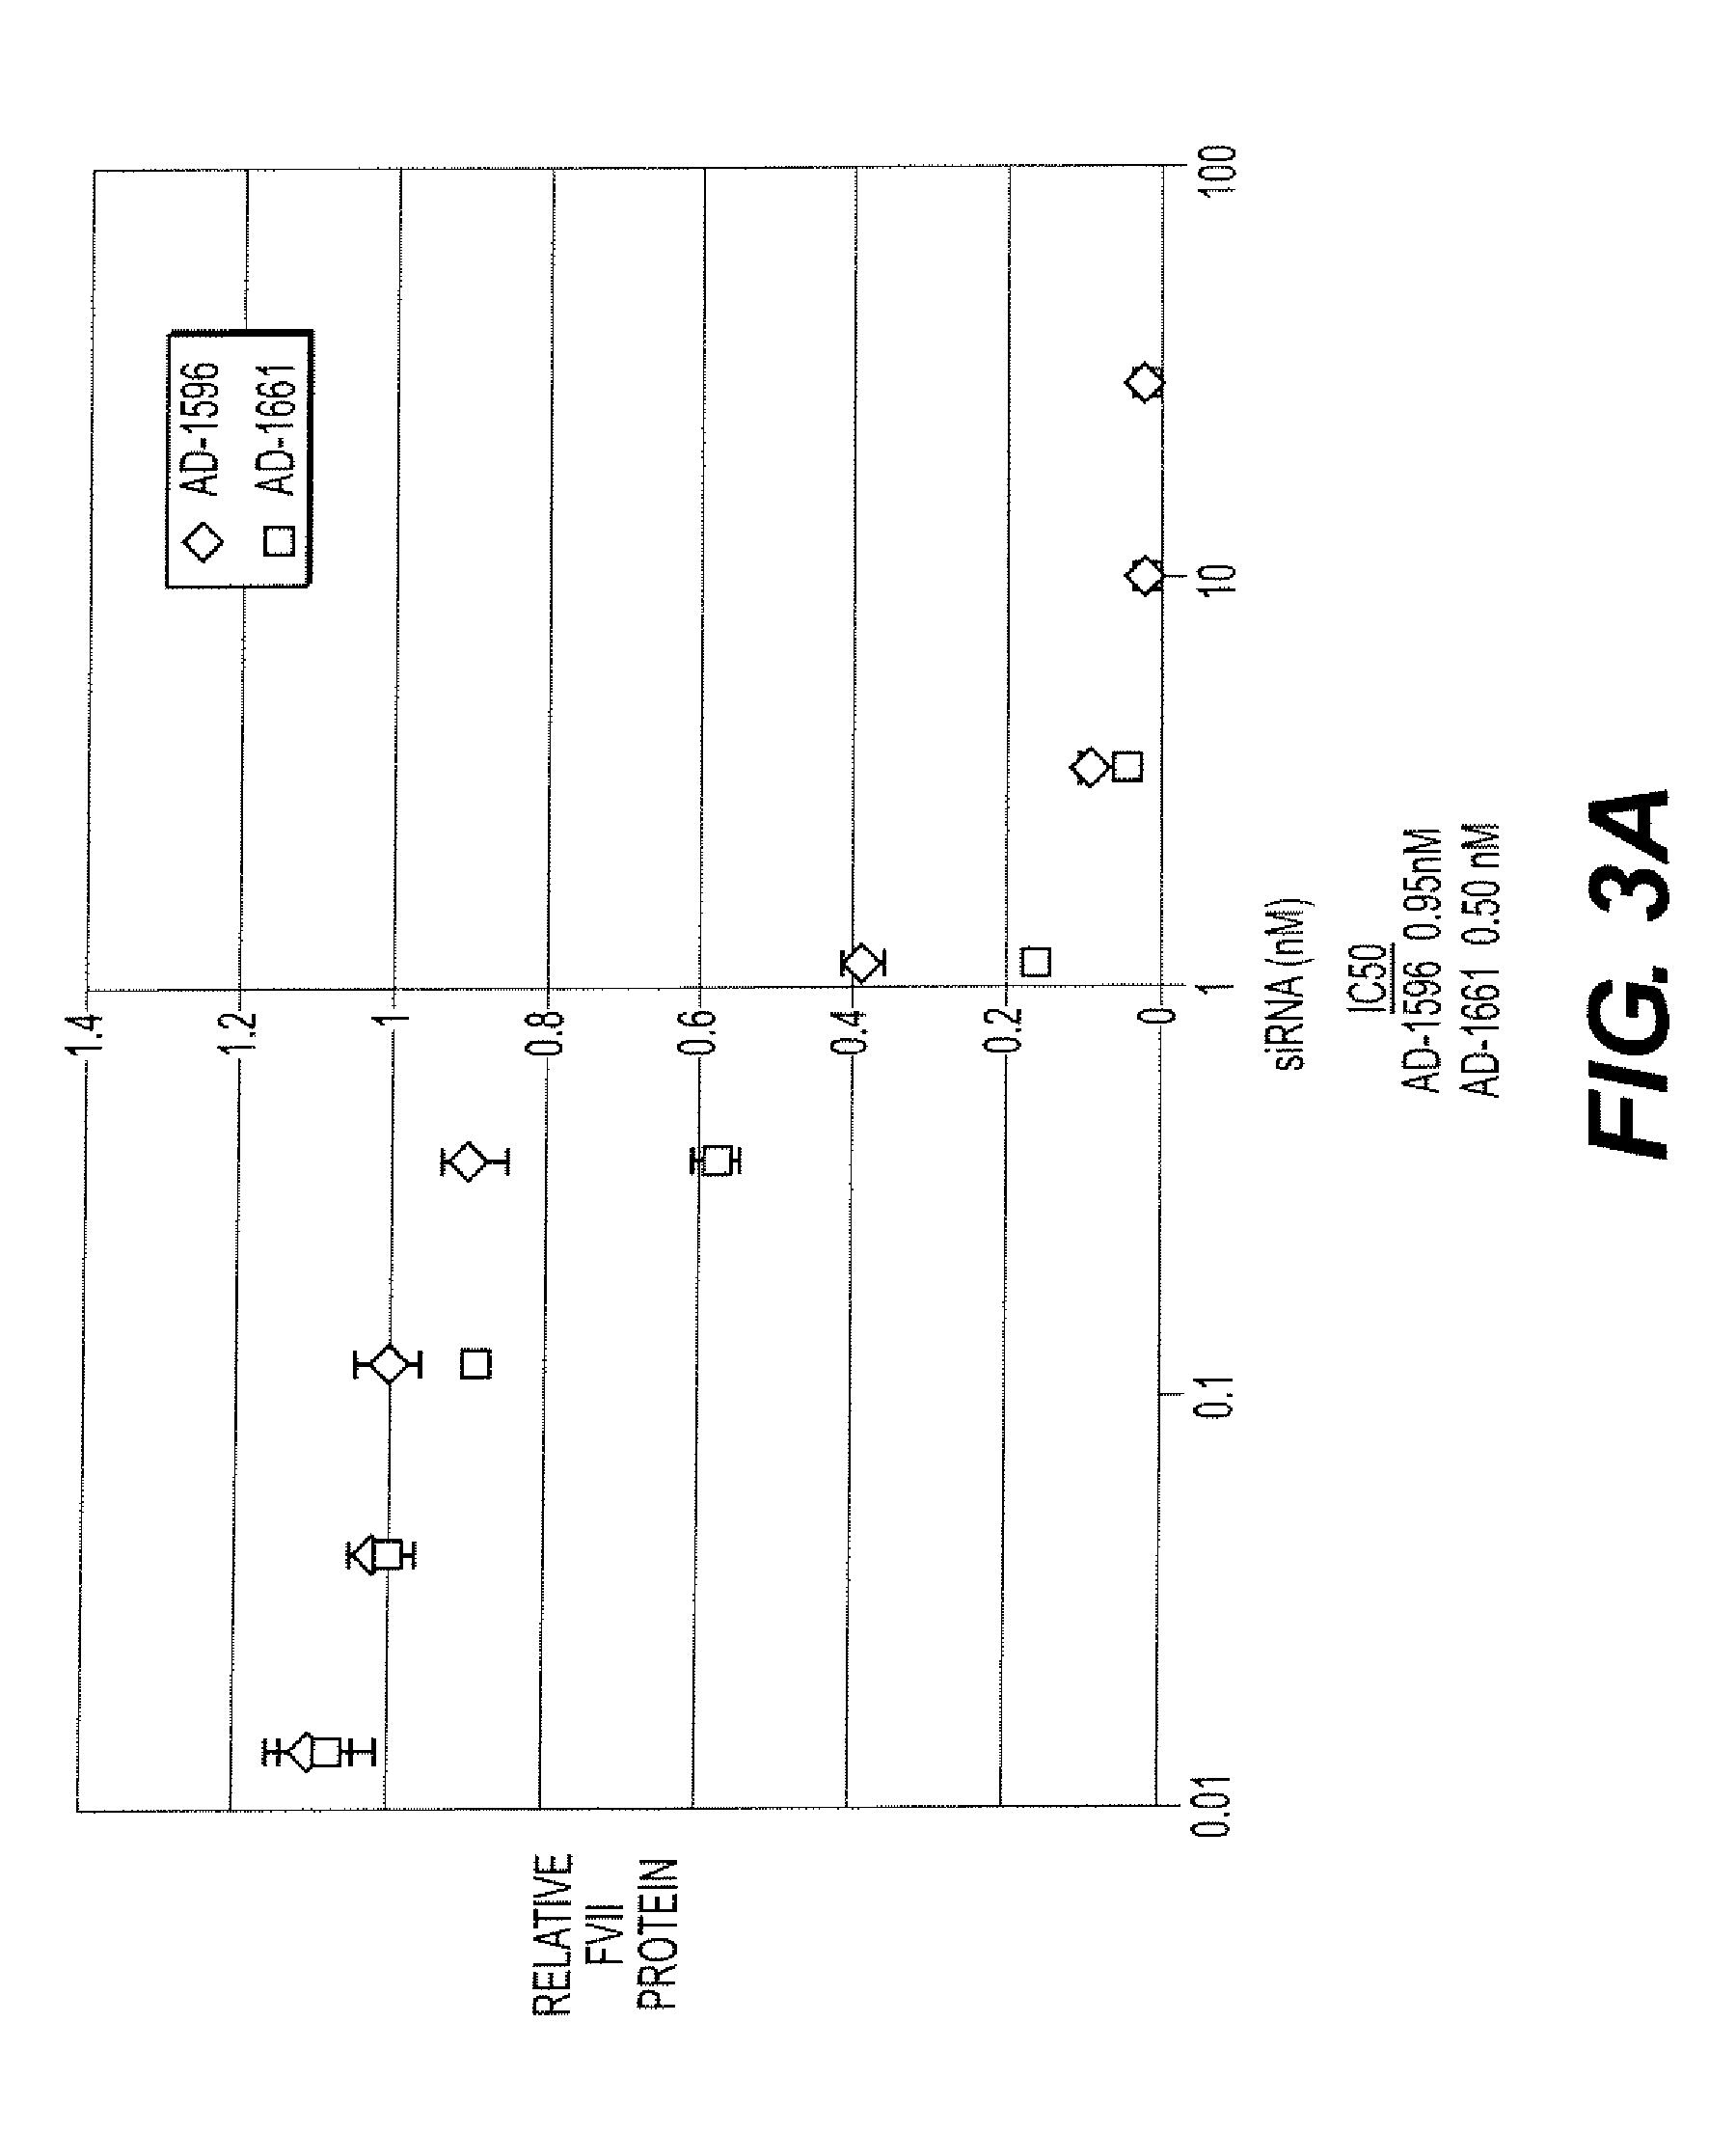 2'-f modified RNA interference agents